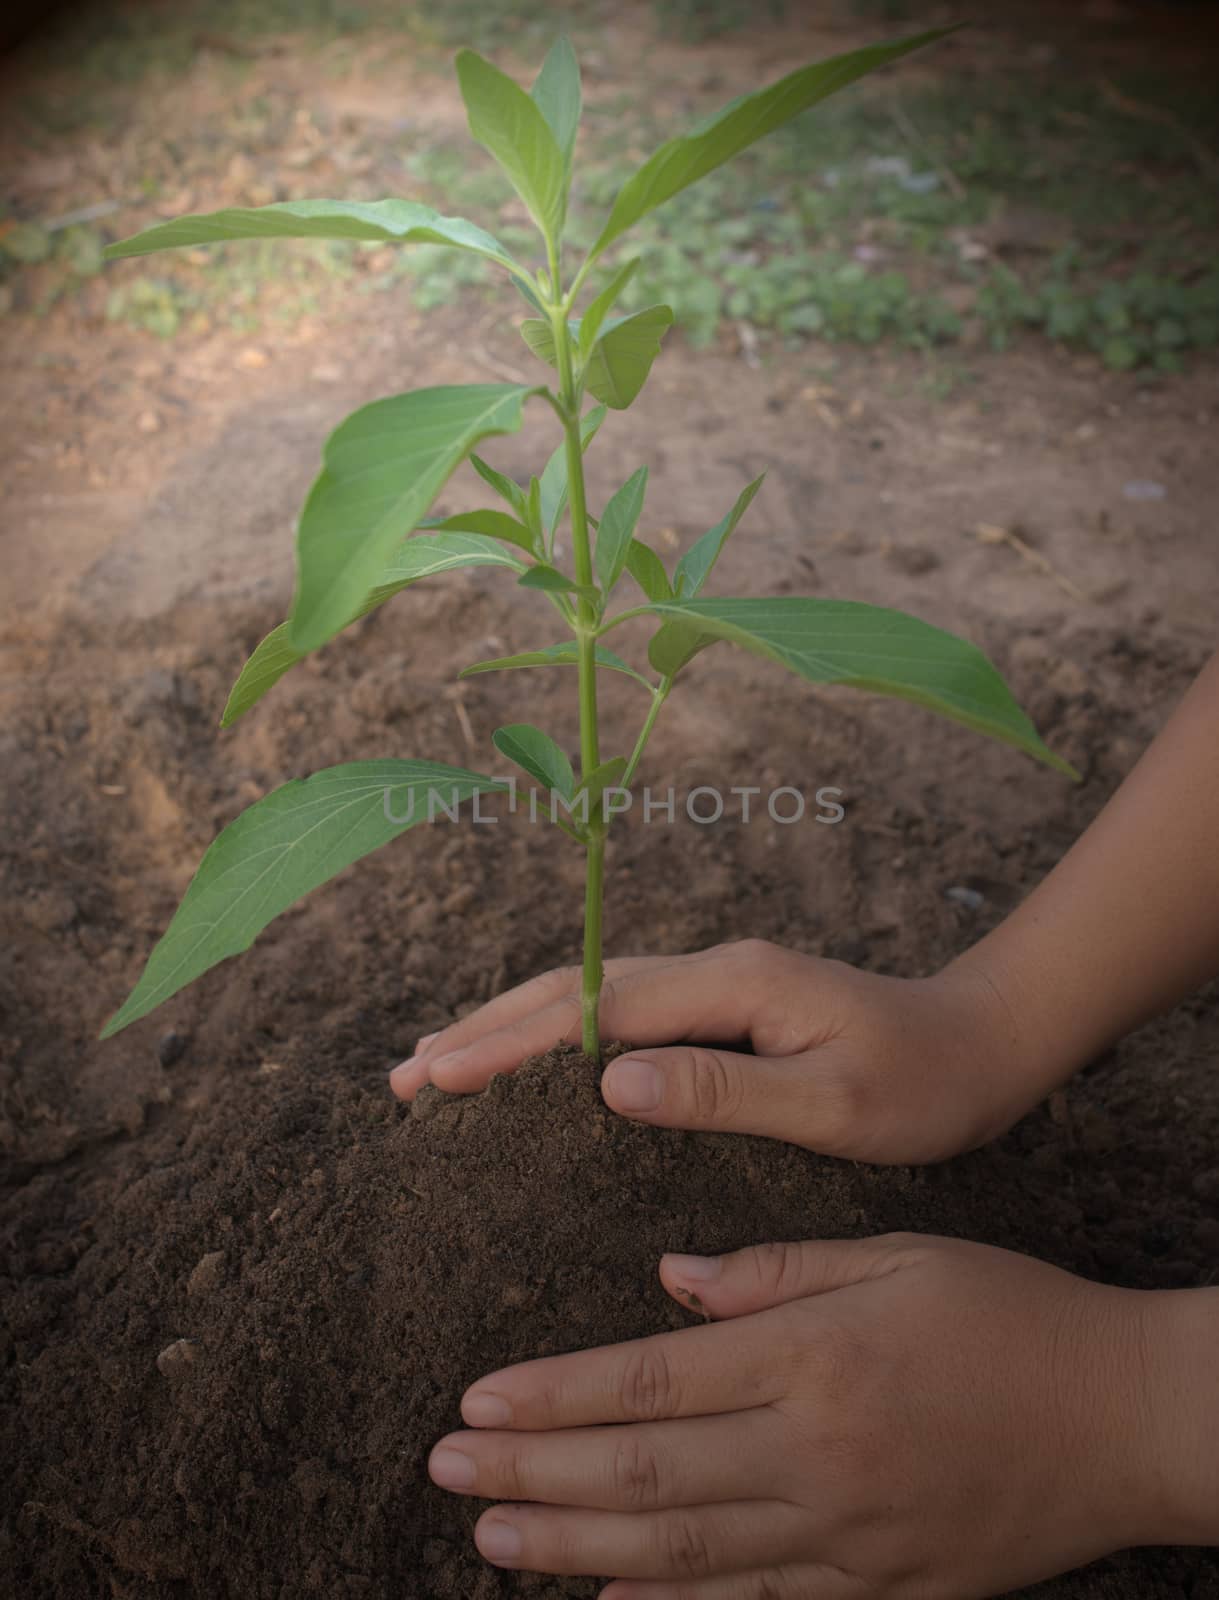 Two hands that support the newly planted seedlings Wonderful ima by noppha80